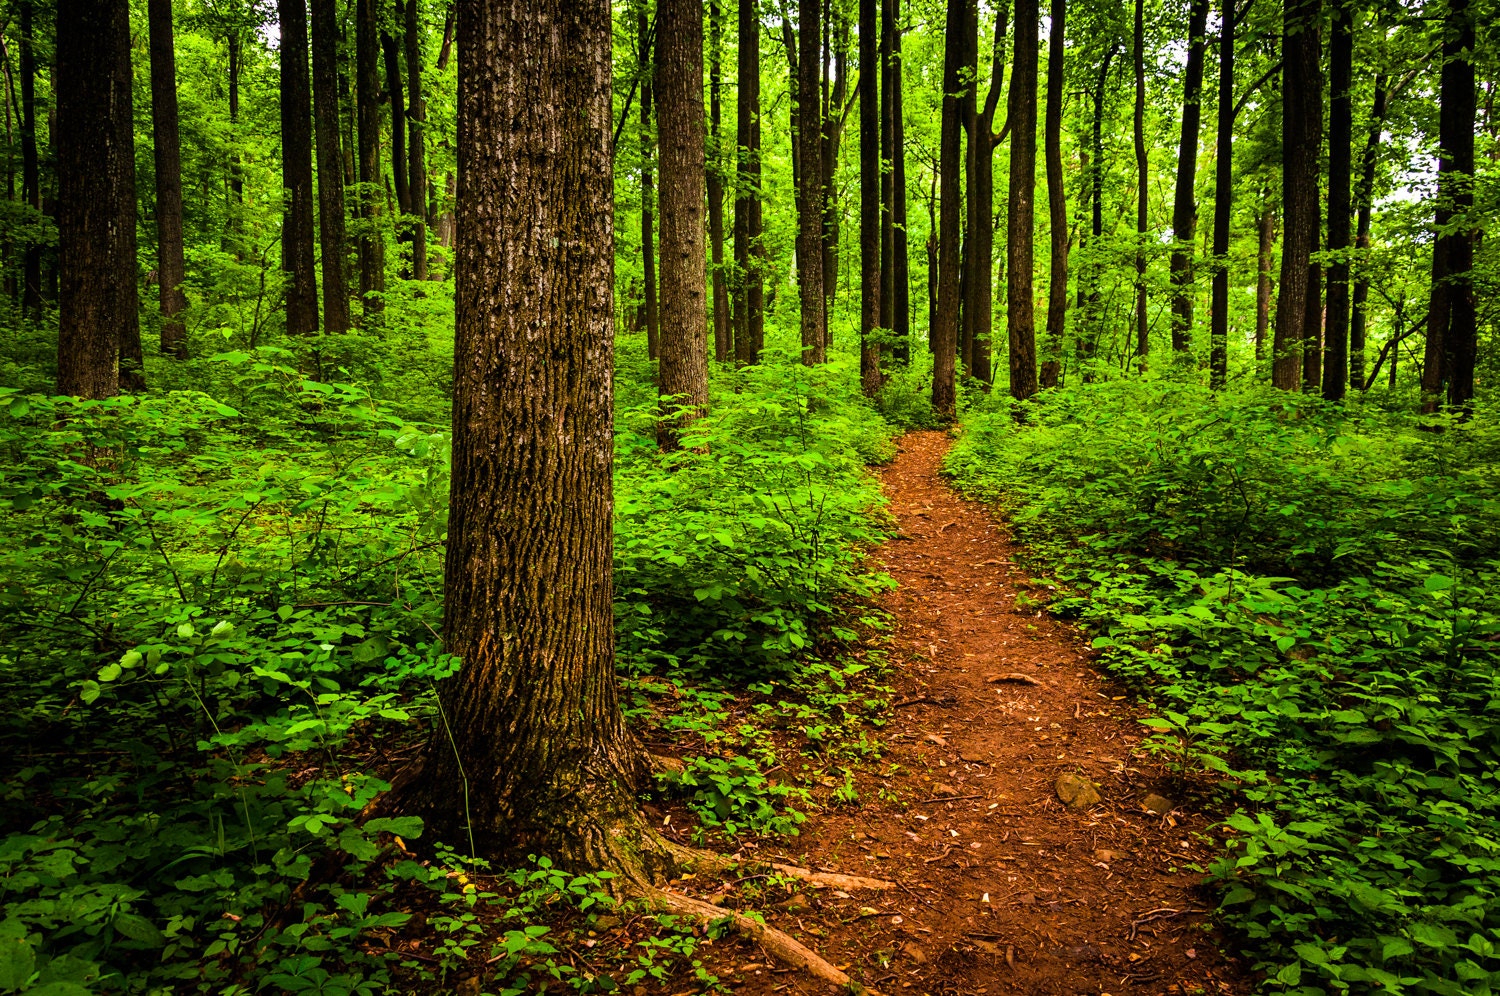 Path through a lush forest in Shenandoah National Park - Nature Photography Fine Art Print or Gallery Wrap Canvas Home Decor - AppalachianViews